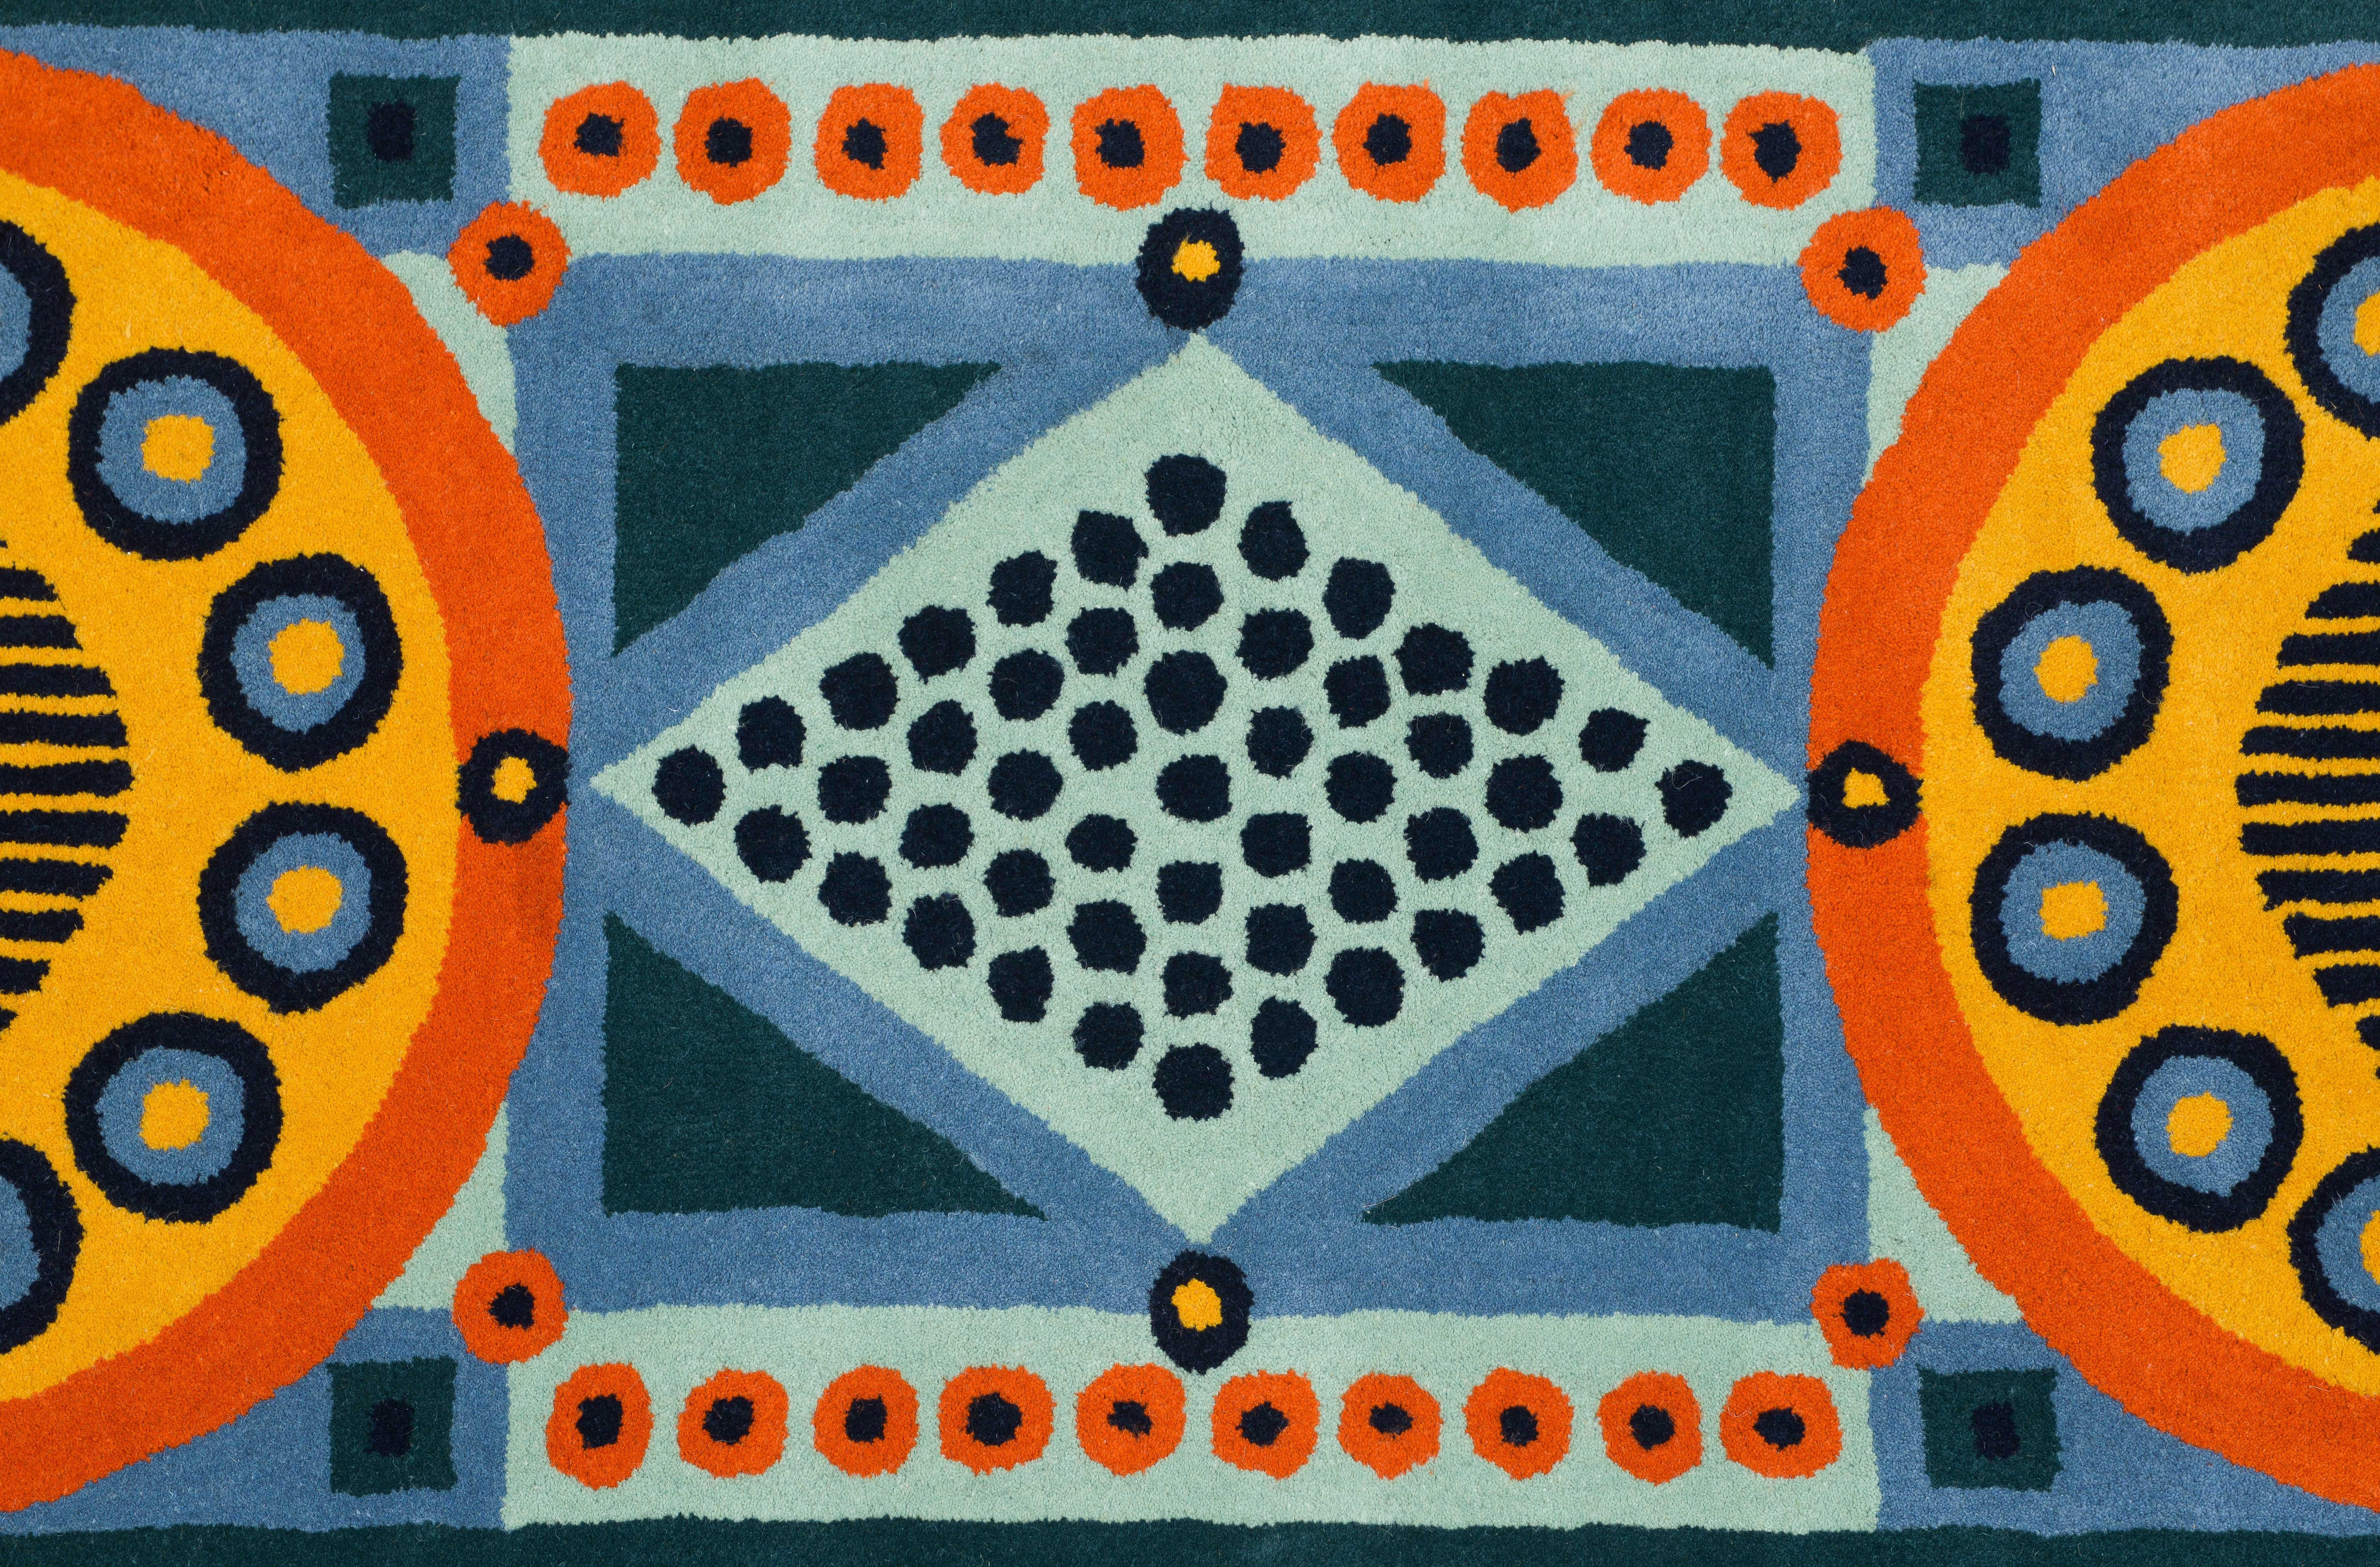 100% Wool hand-tufted pile rug. Makers mark at one end: 'C'  inside a Bell shape. Manufactured in India. 

Cressida Bell is a British designer specialising in textiles and interiors. From her London studio, she produces a wide range of products